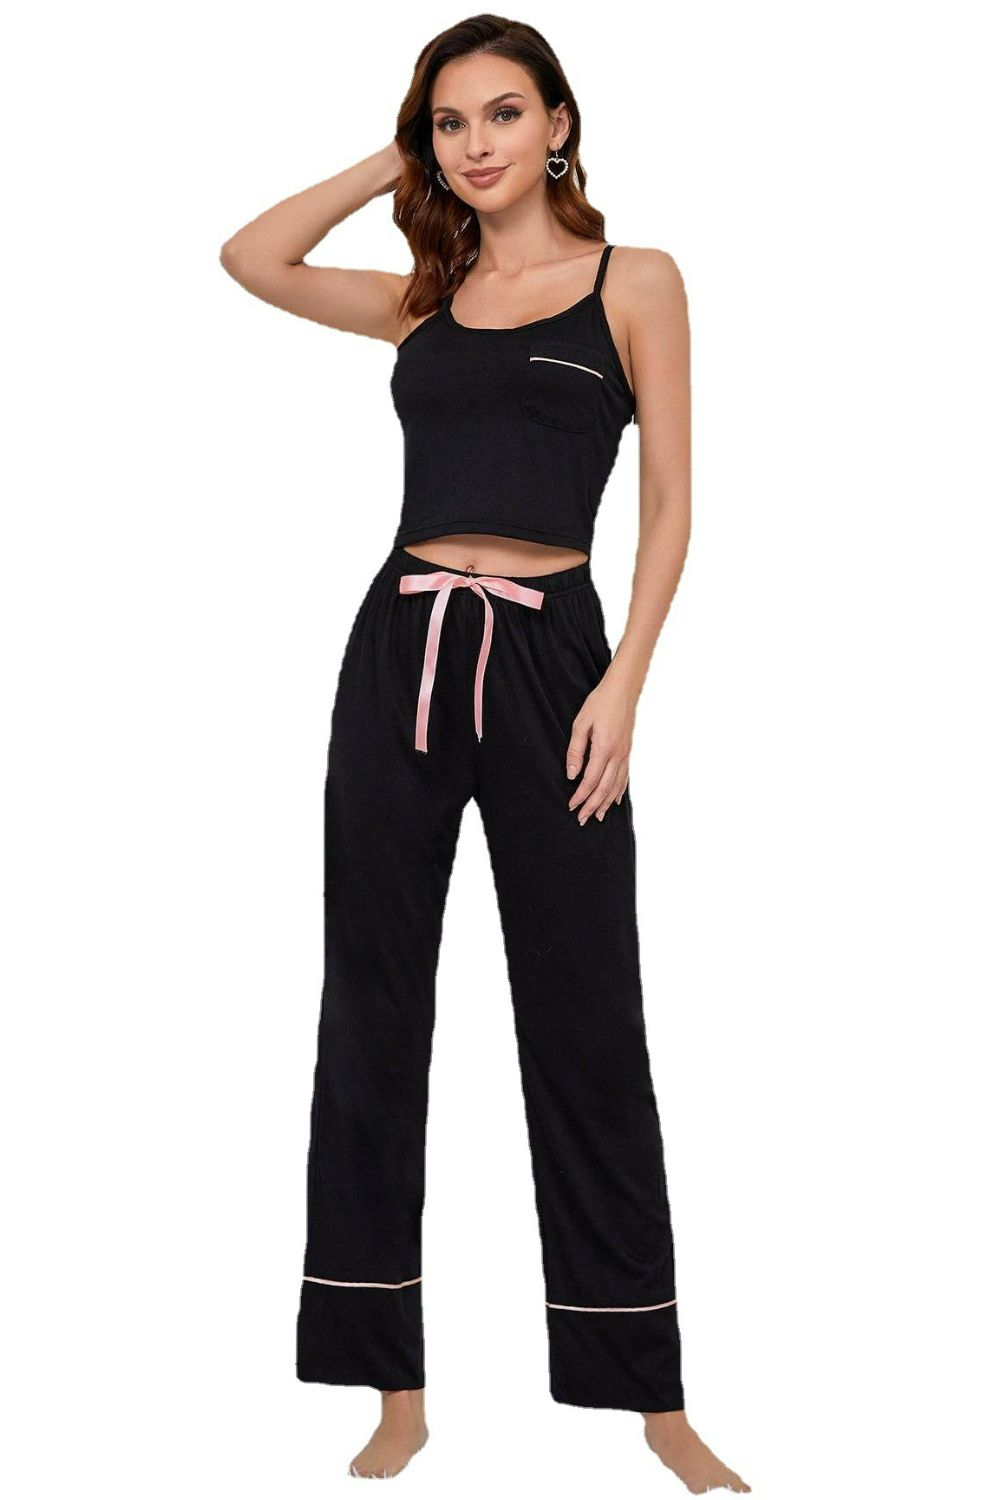 Women’s  Contrast Trim Cropped Cami and Pants Loungewear Set